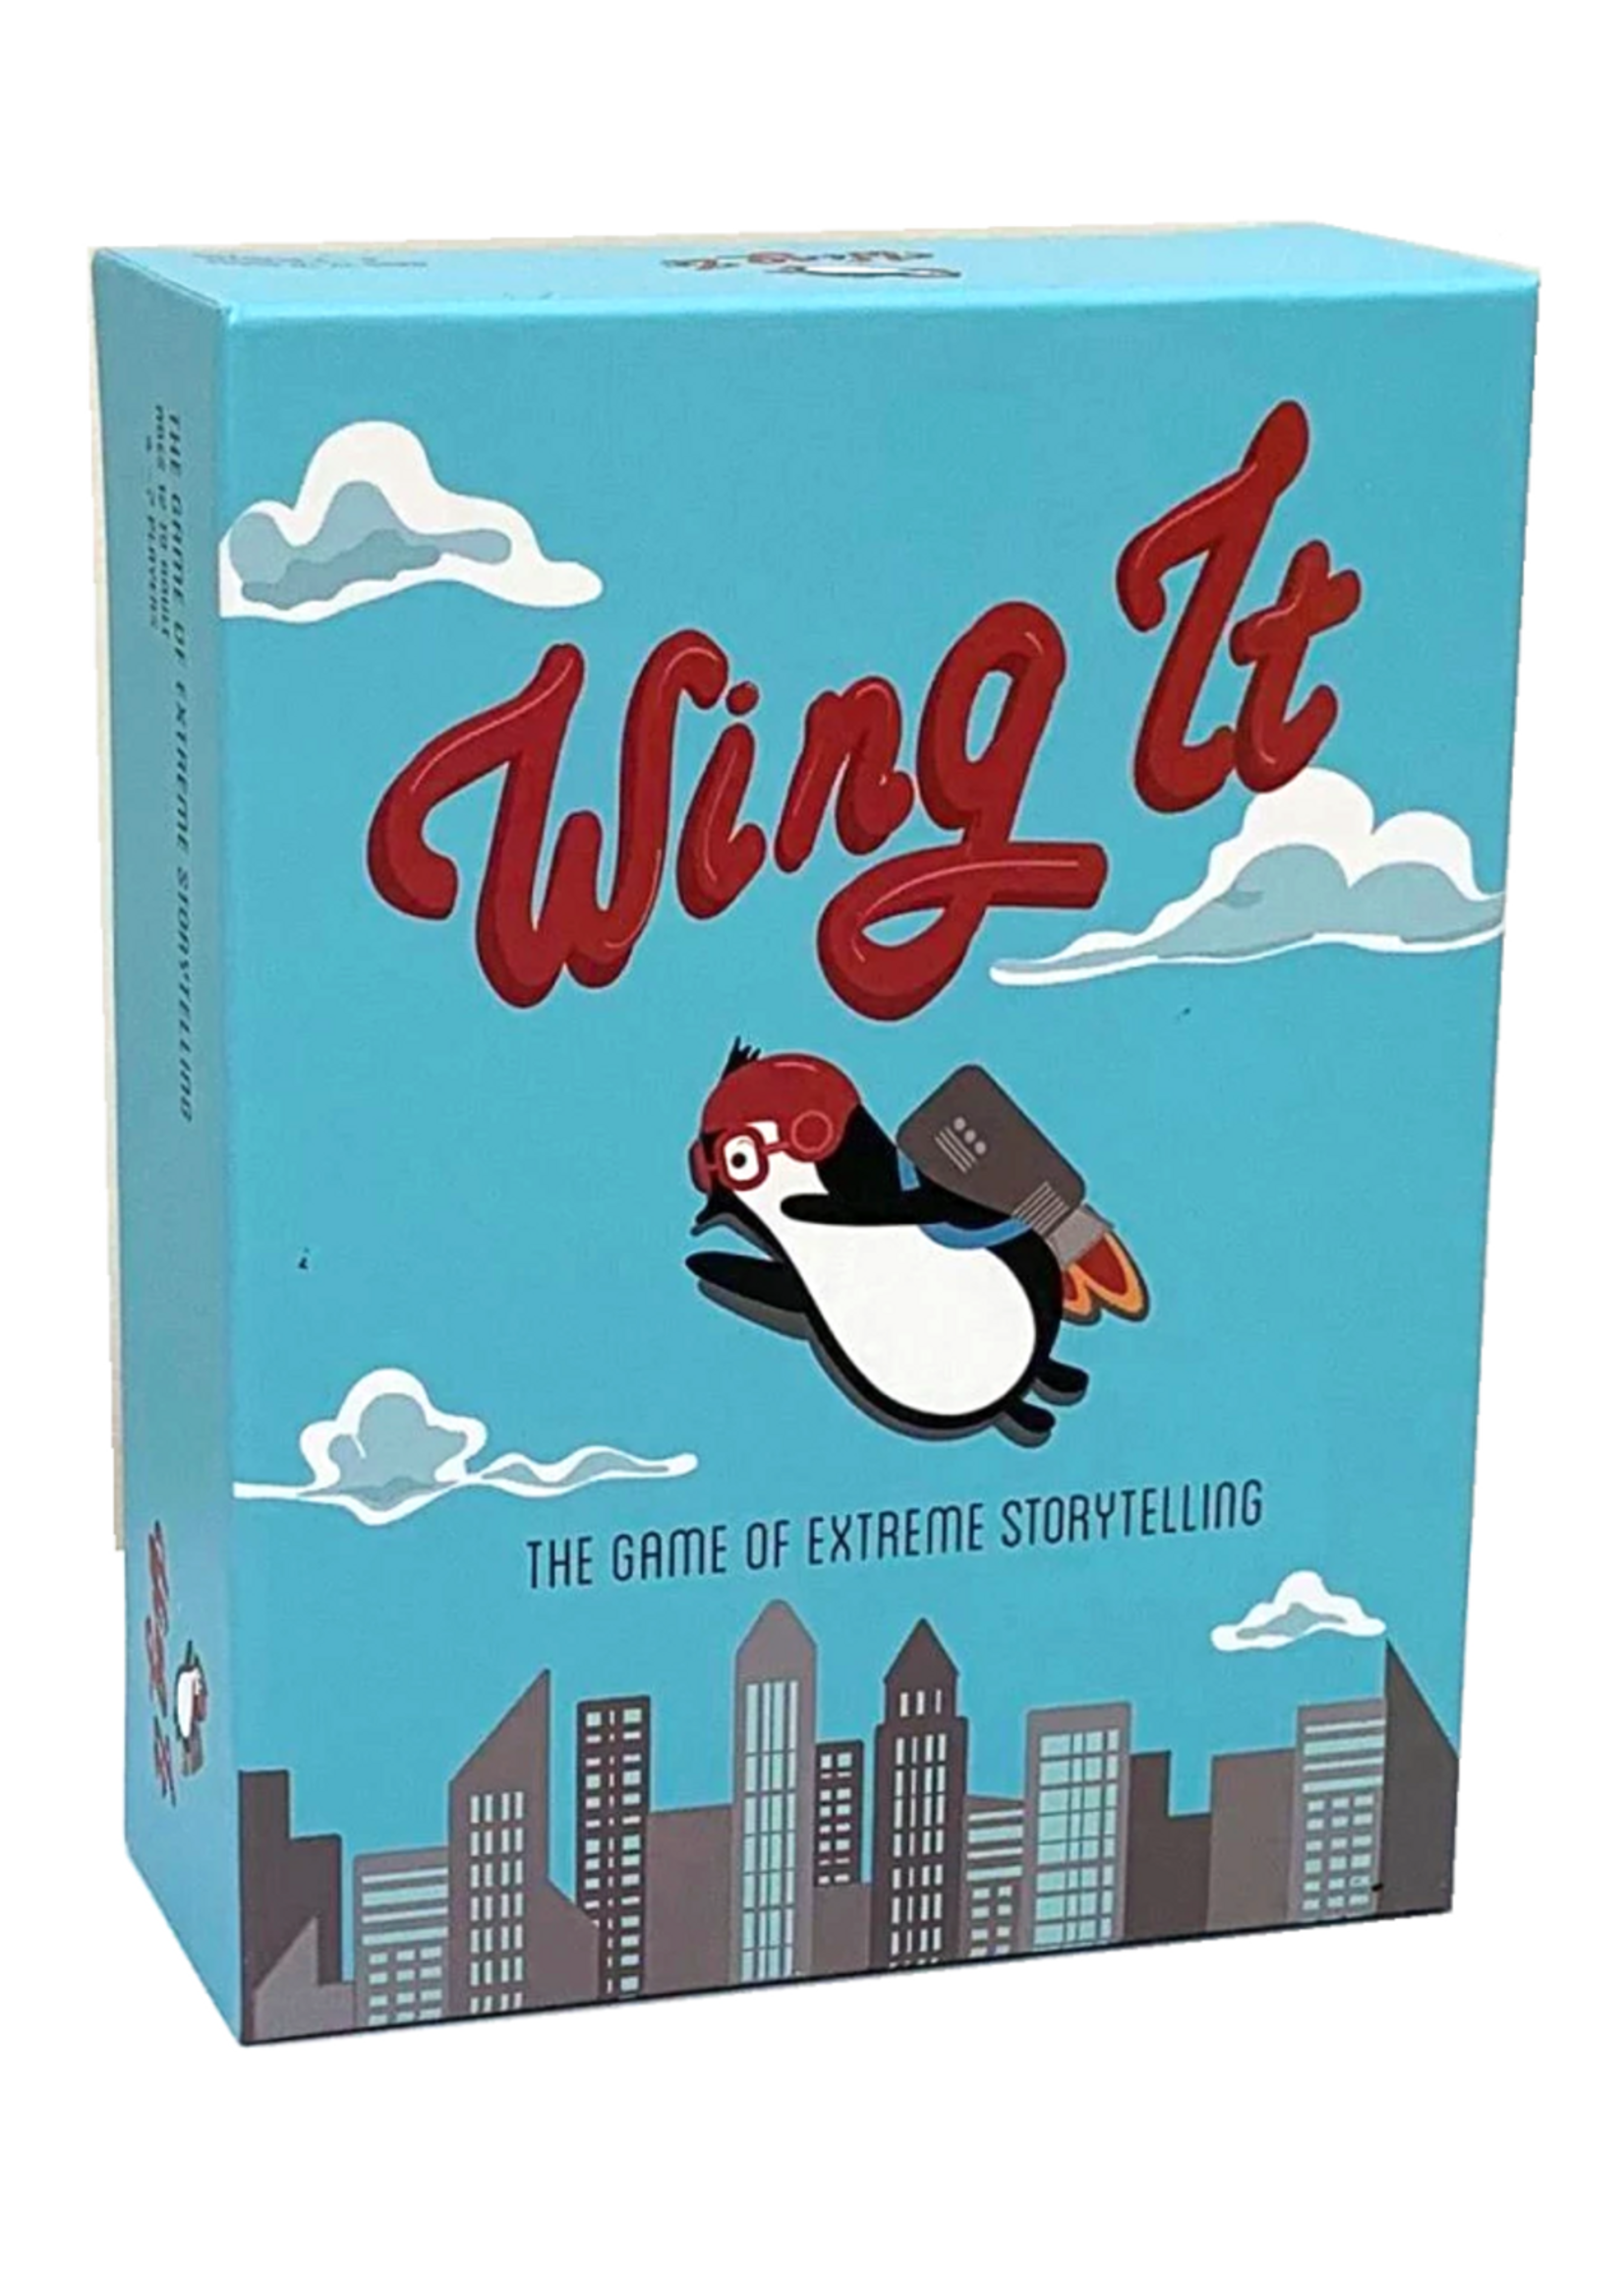 Flyos Wing It: The Game of Extreme Storytelling